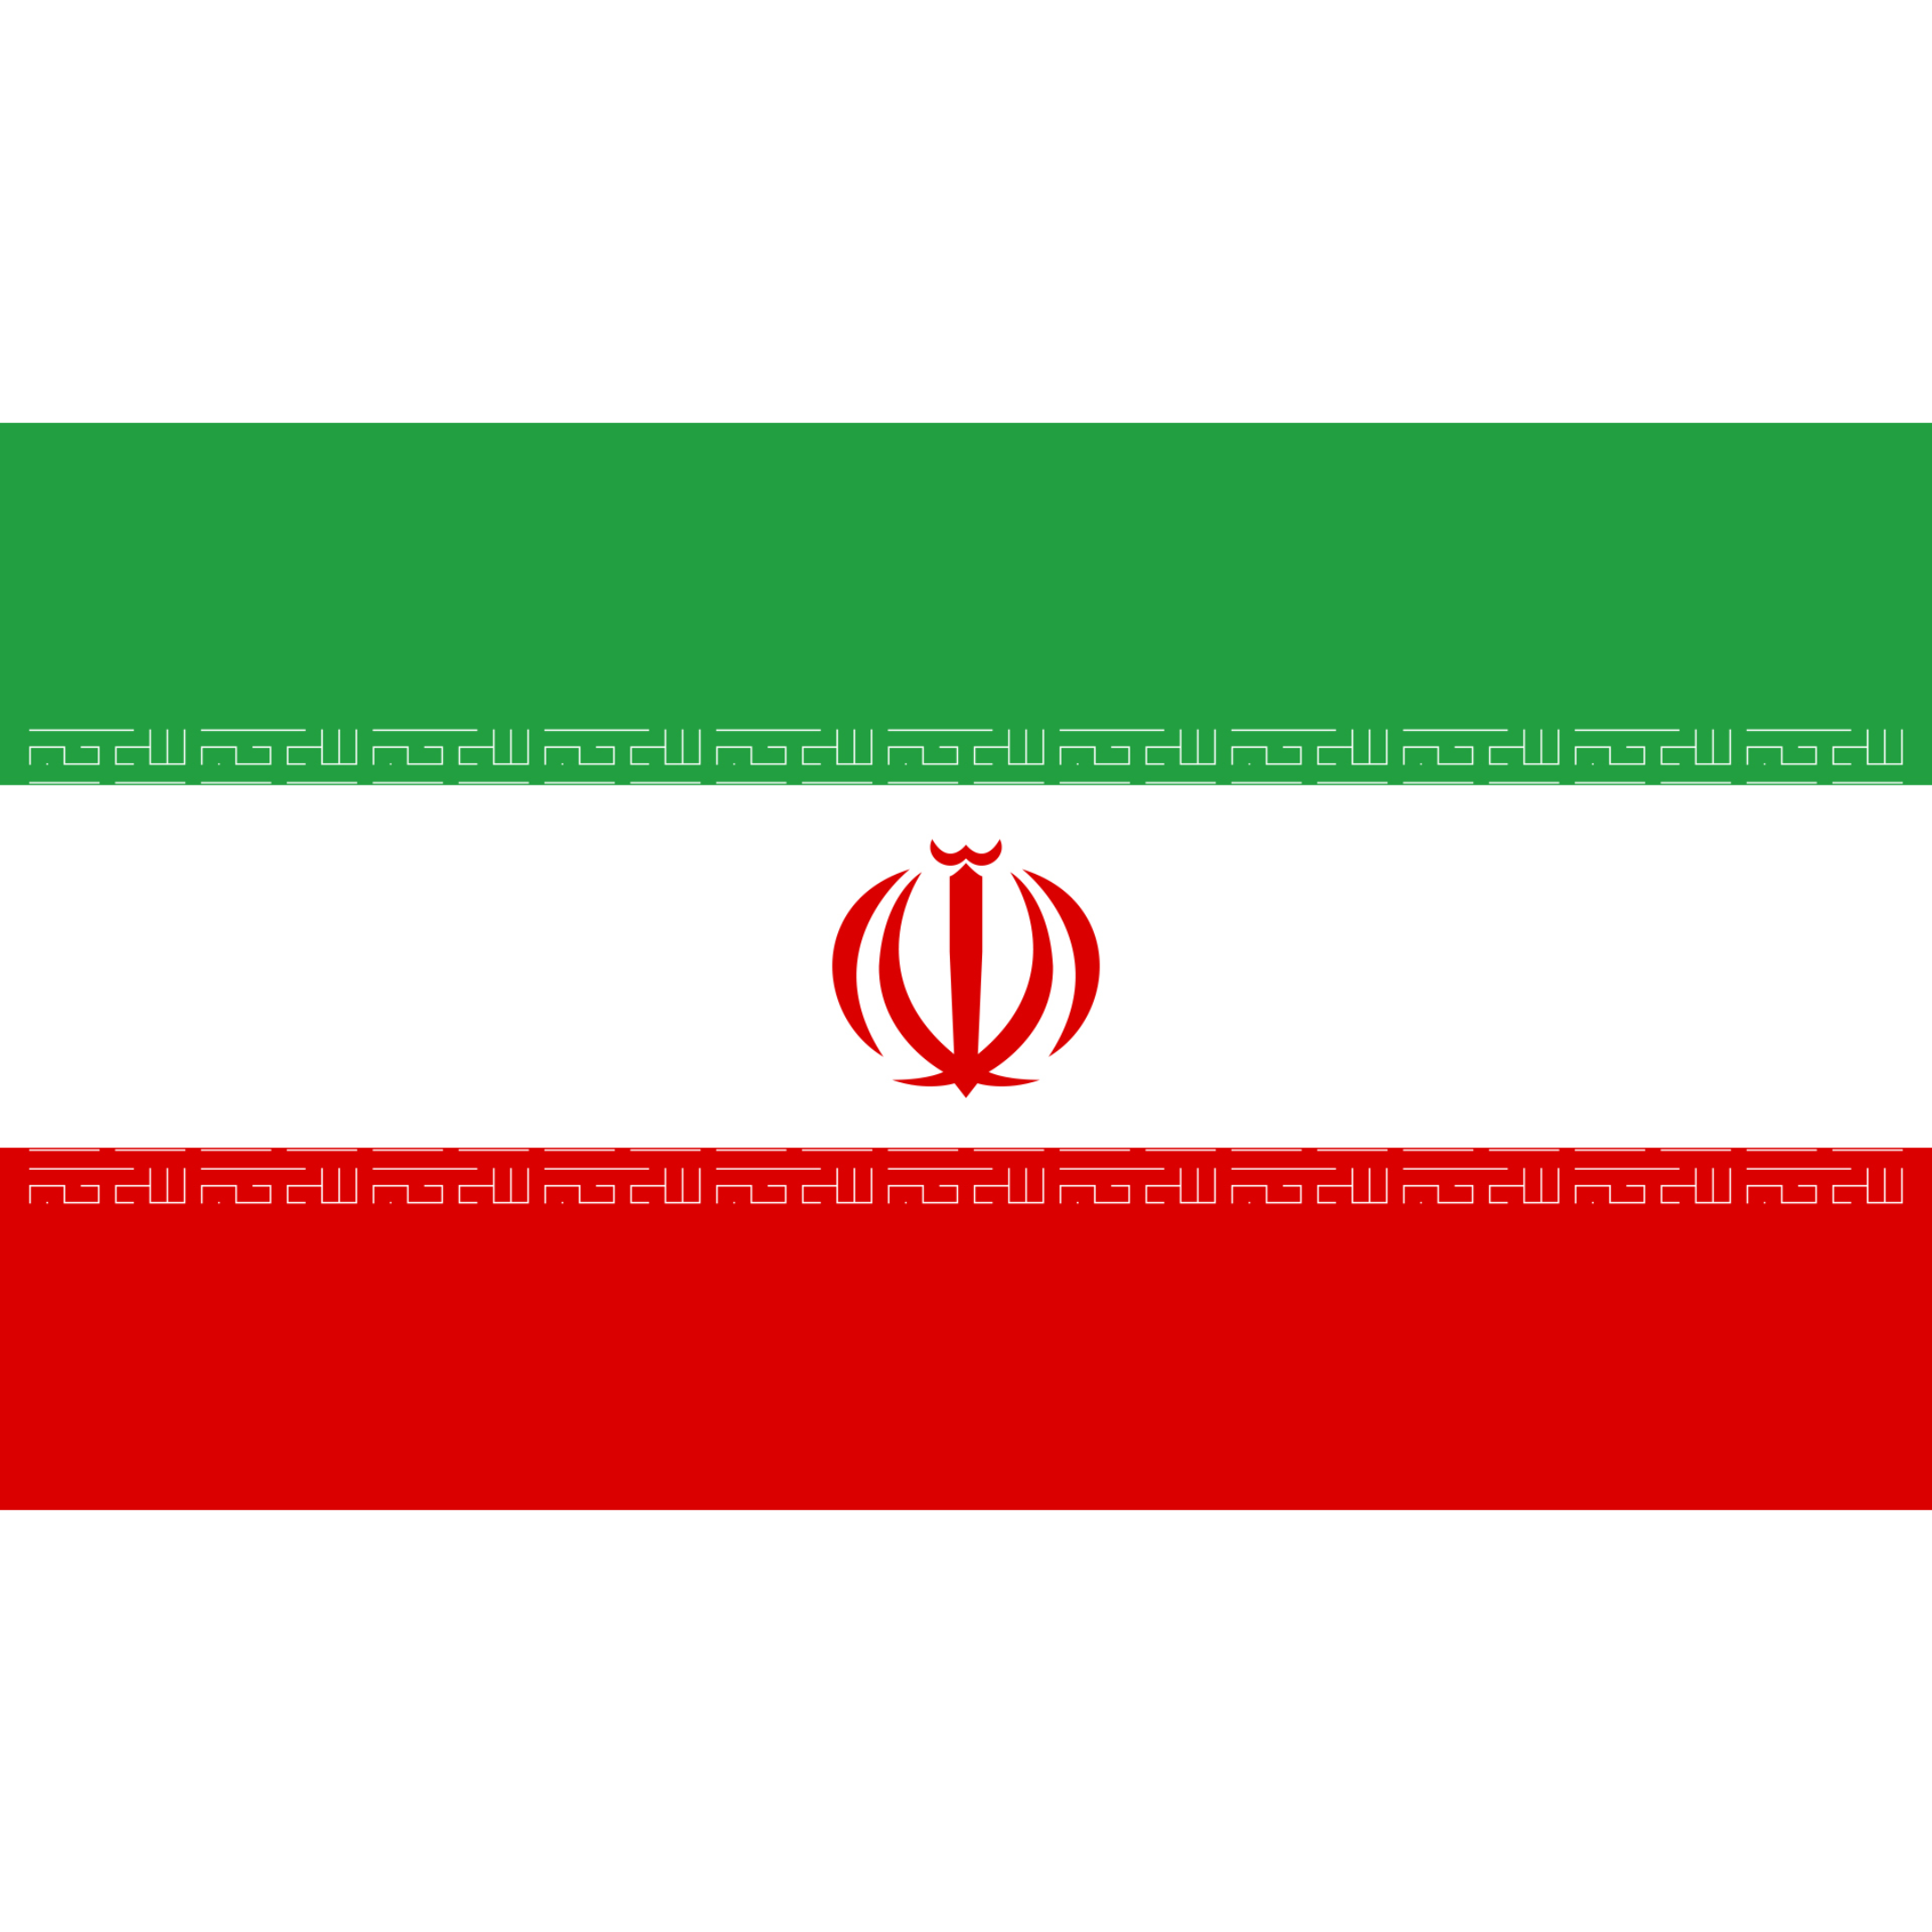 The Iranian flag is made up of horizontal green, white and red stripes with the national emblem in red centred in the middle.